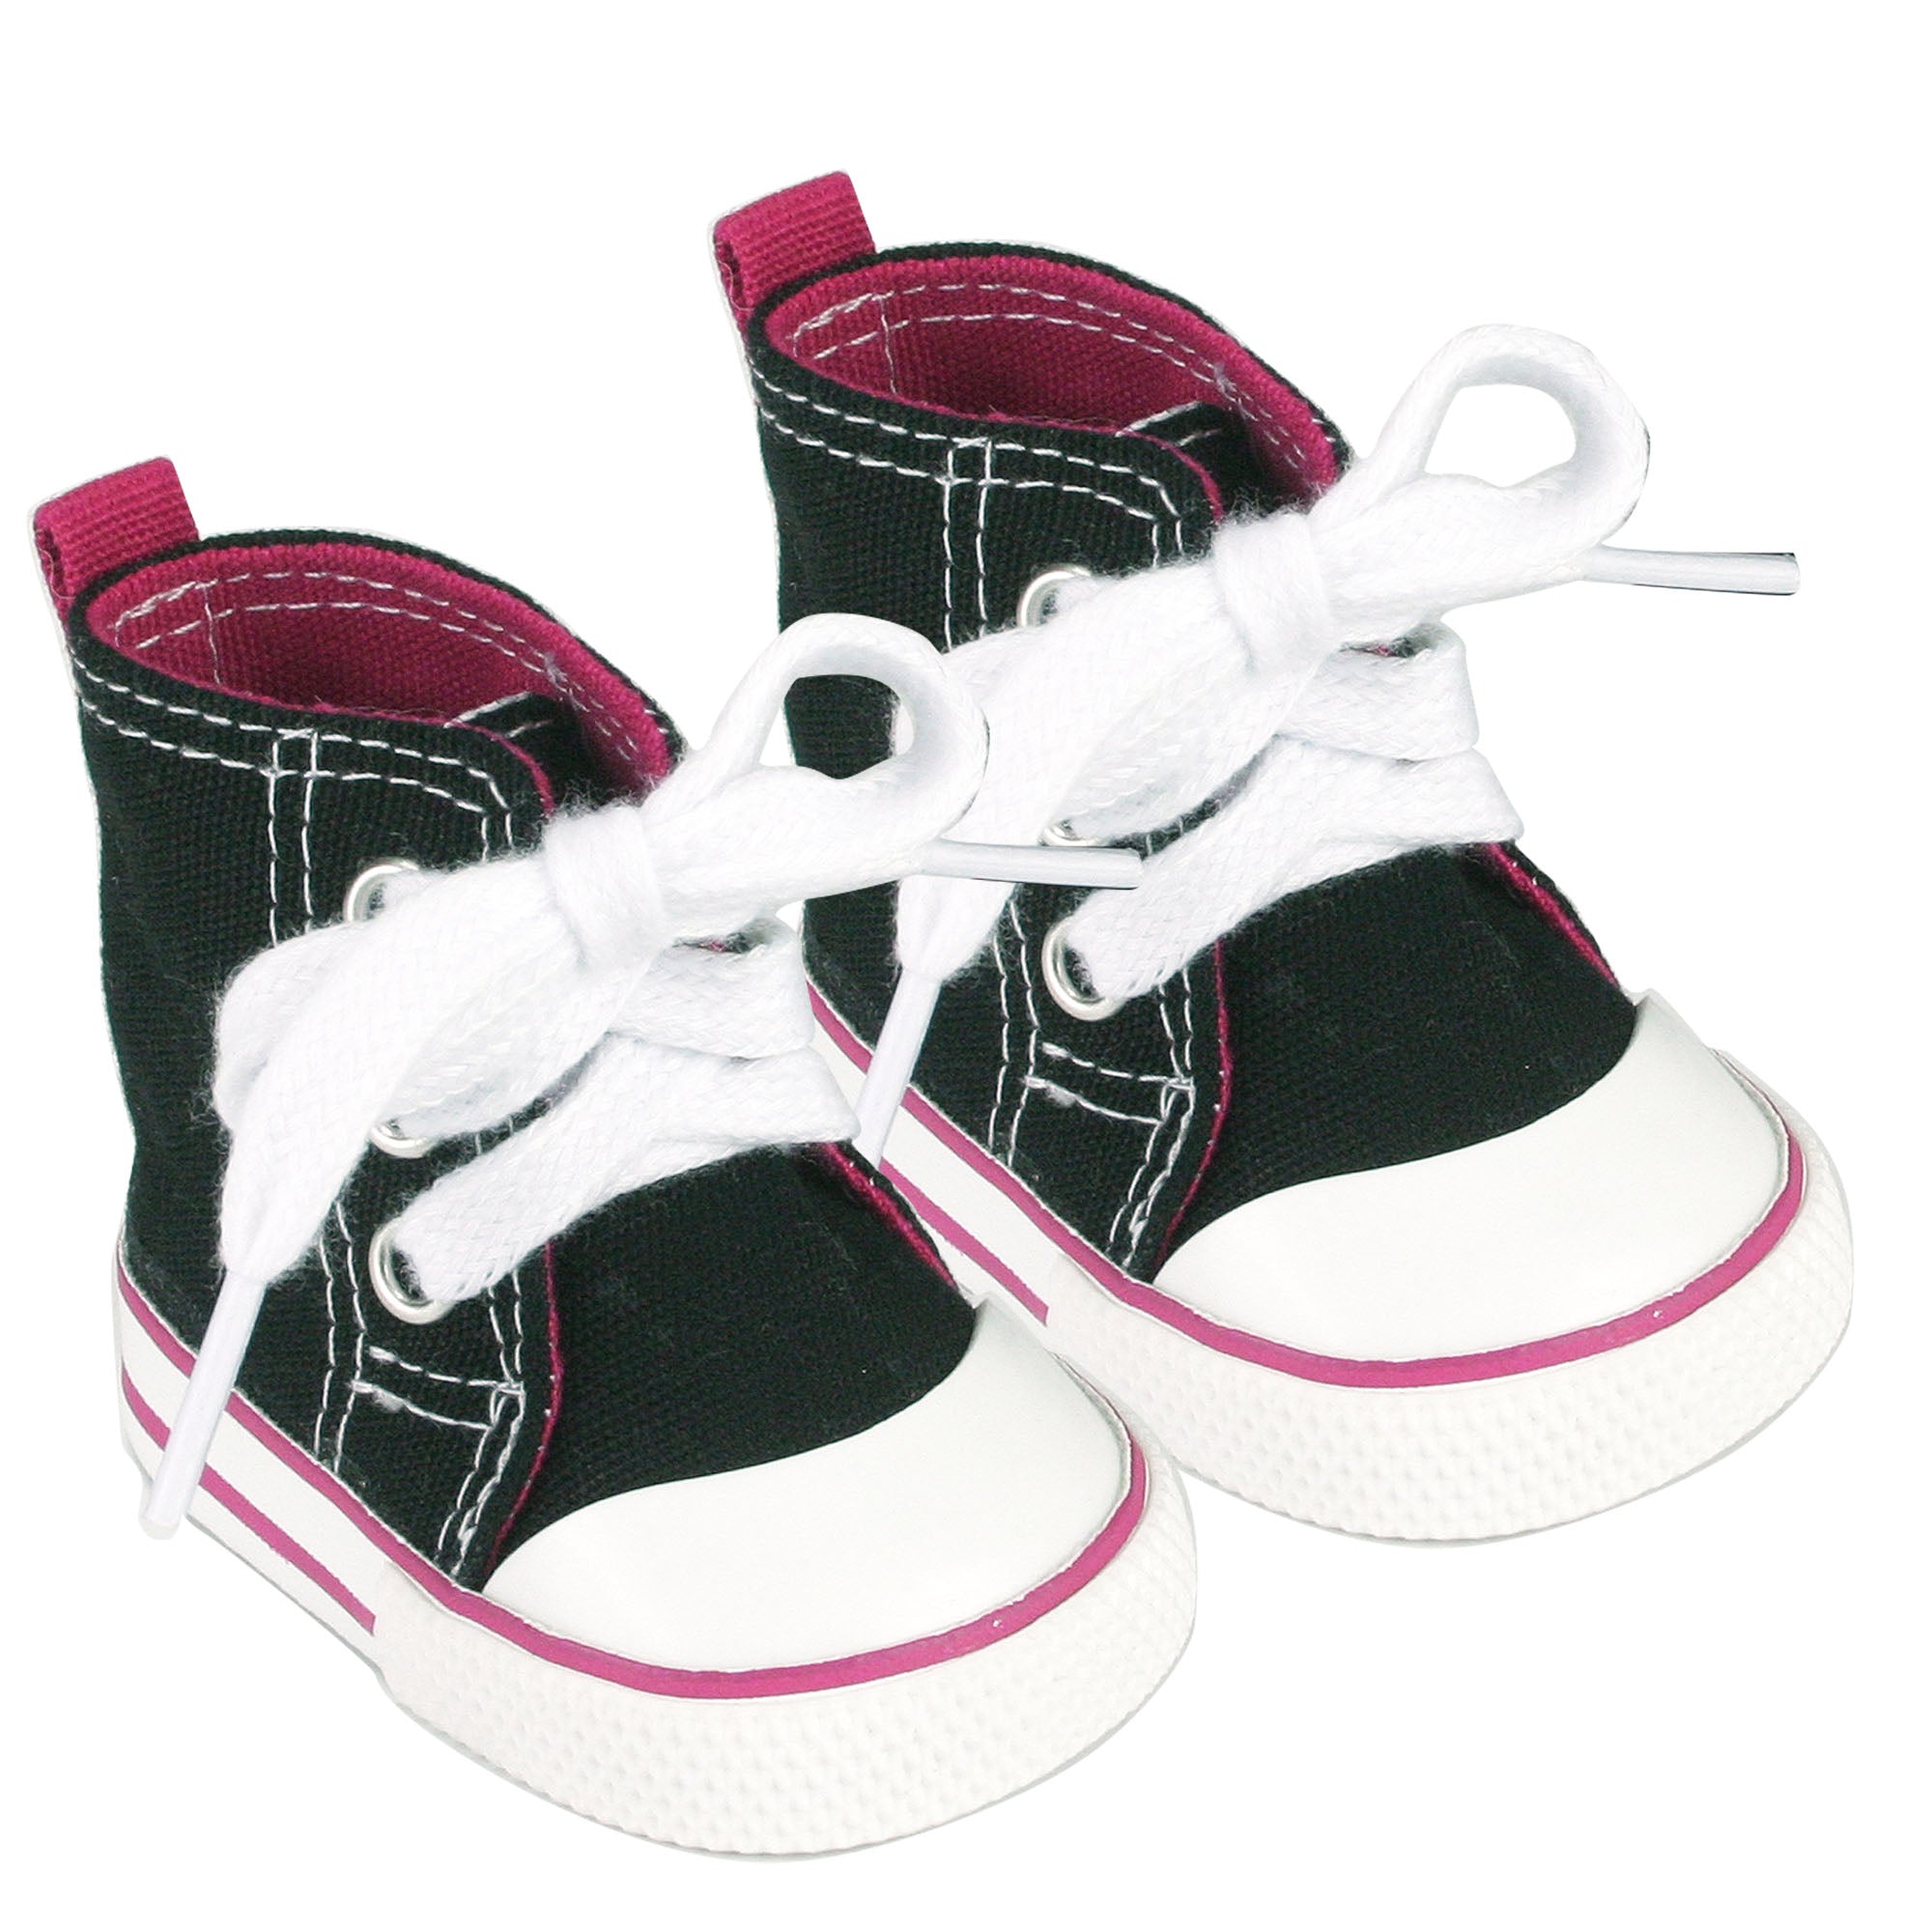 Sophia’s Cute High-Top Canvas Sneakers for 18” Boy or Girl Dolls, Black